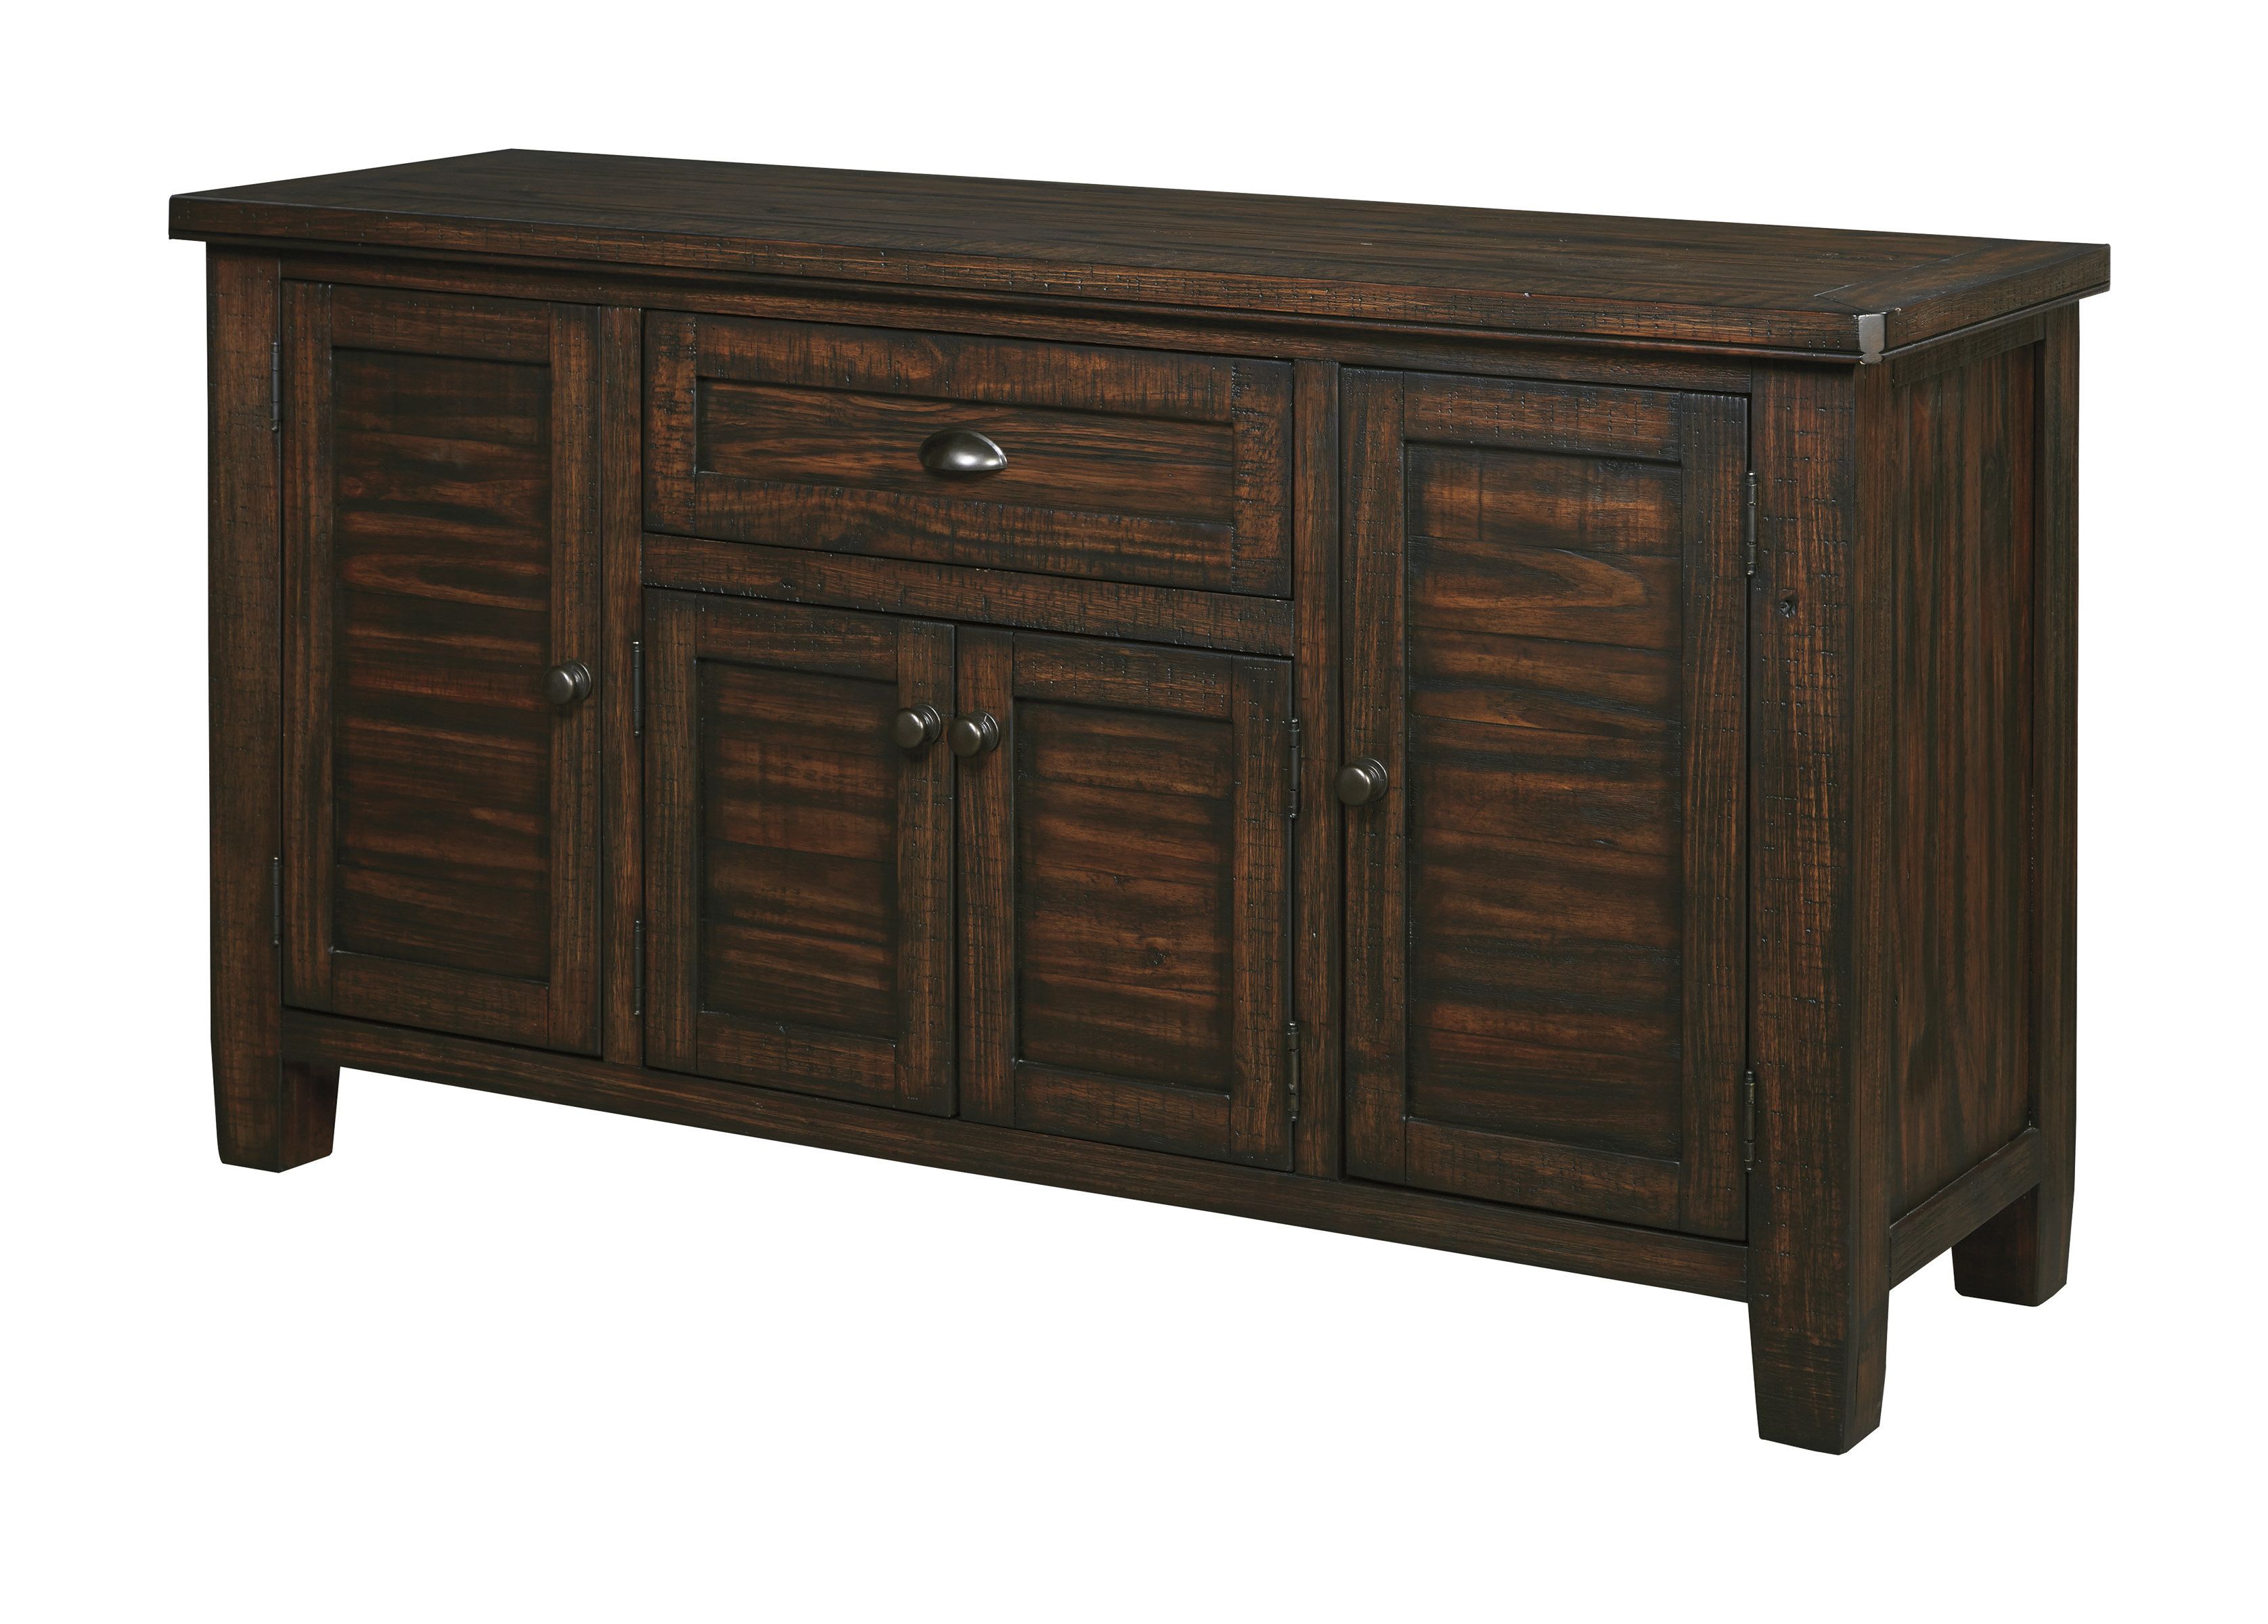 Chaffins Sideboard Regarding Most Current Chaffins Sideboards (View 1 of 20)